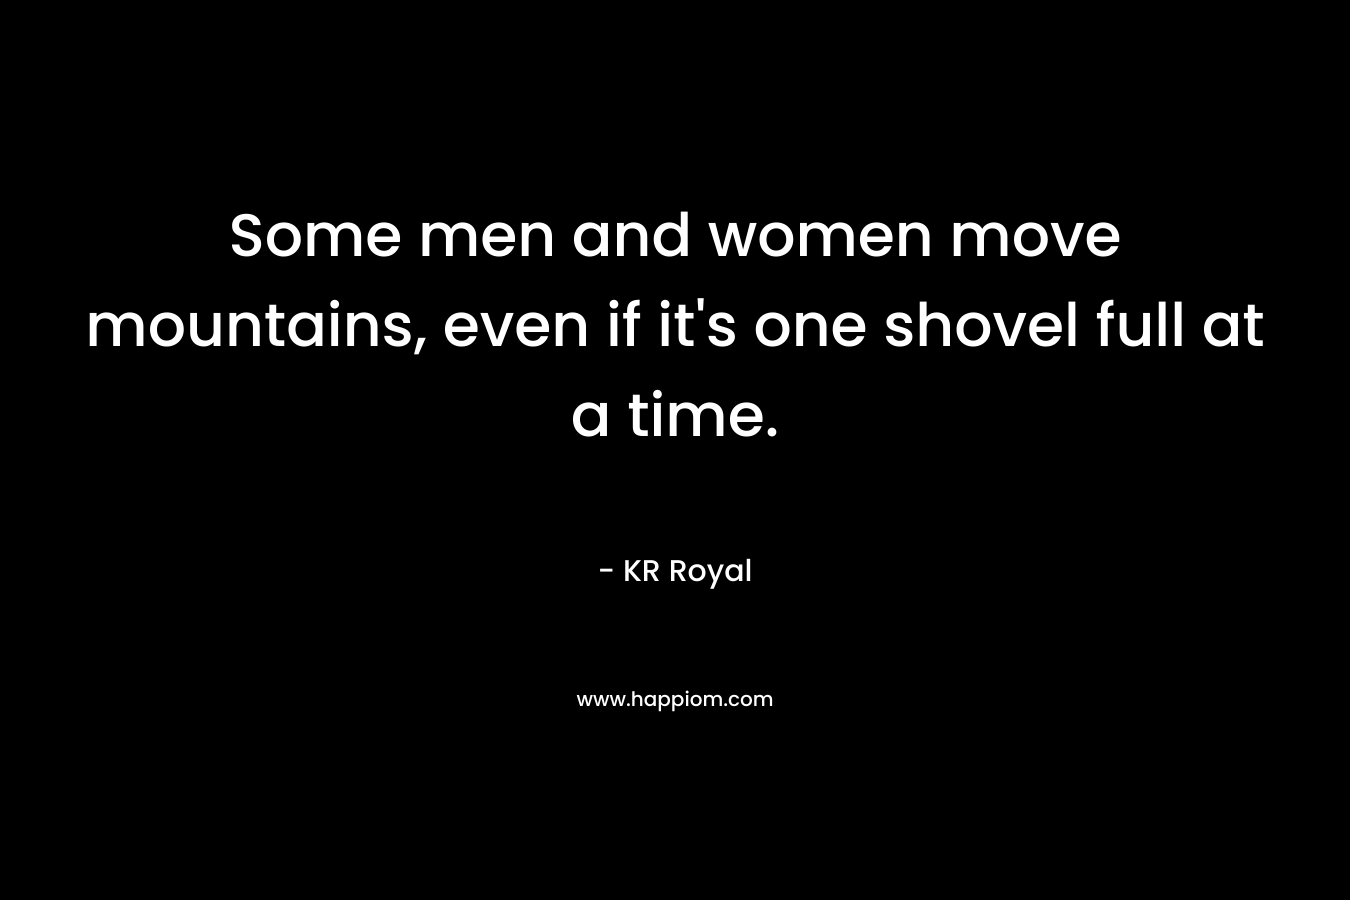 Some men and women move mountains, even if it's one shovel full at a time.